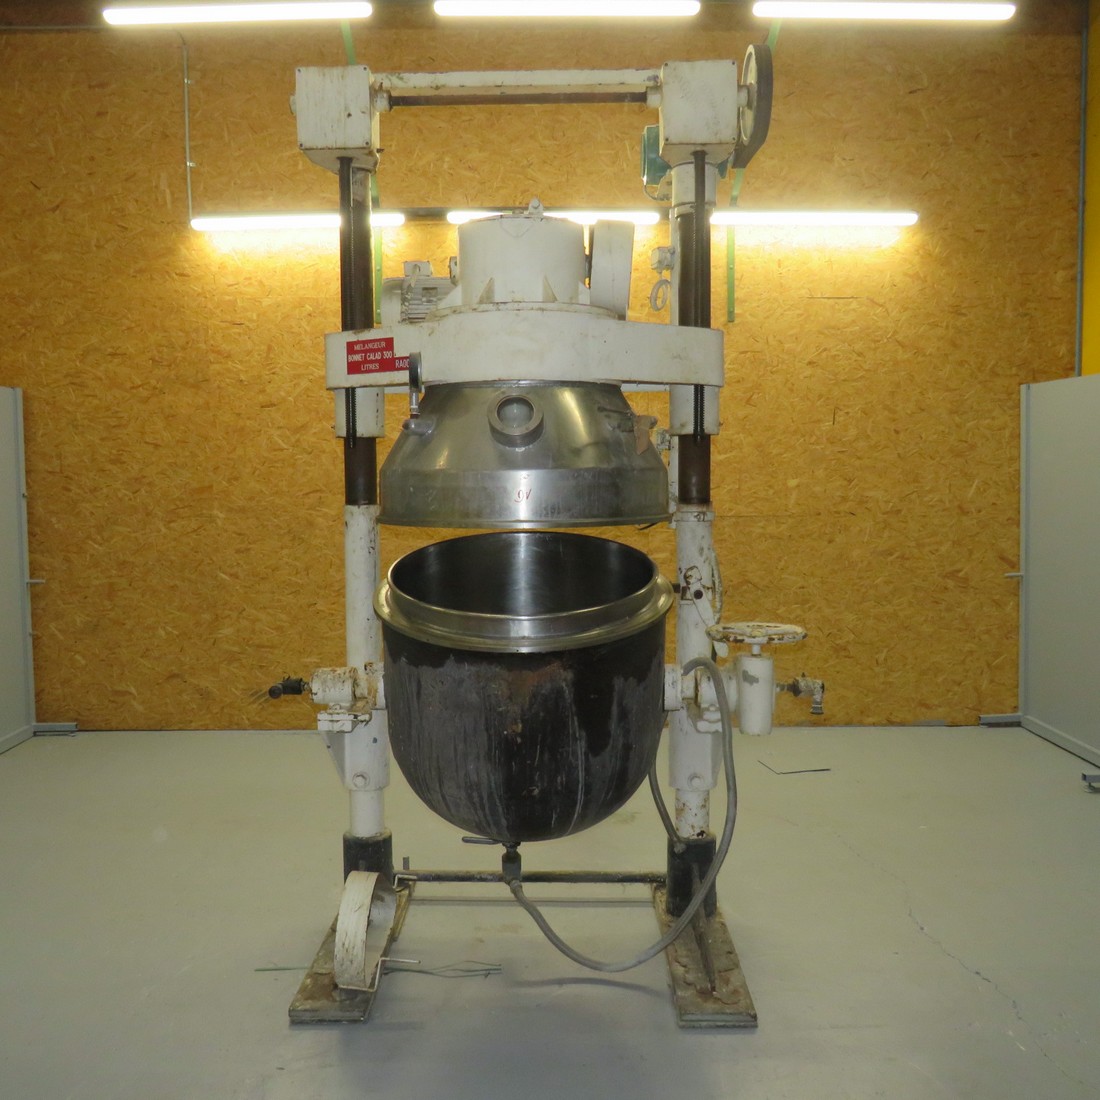 Stainless steel BONNET CALAD planetary mixer 300 litres